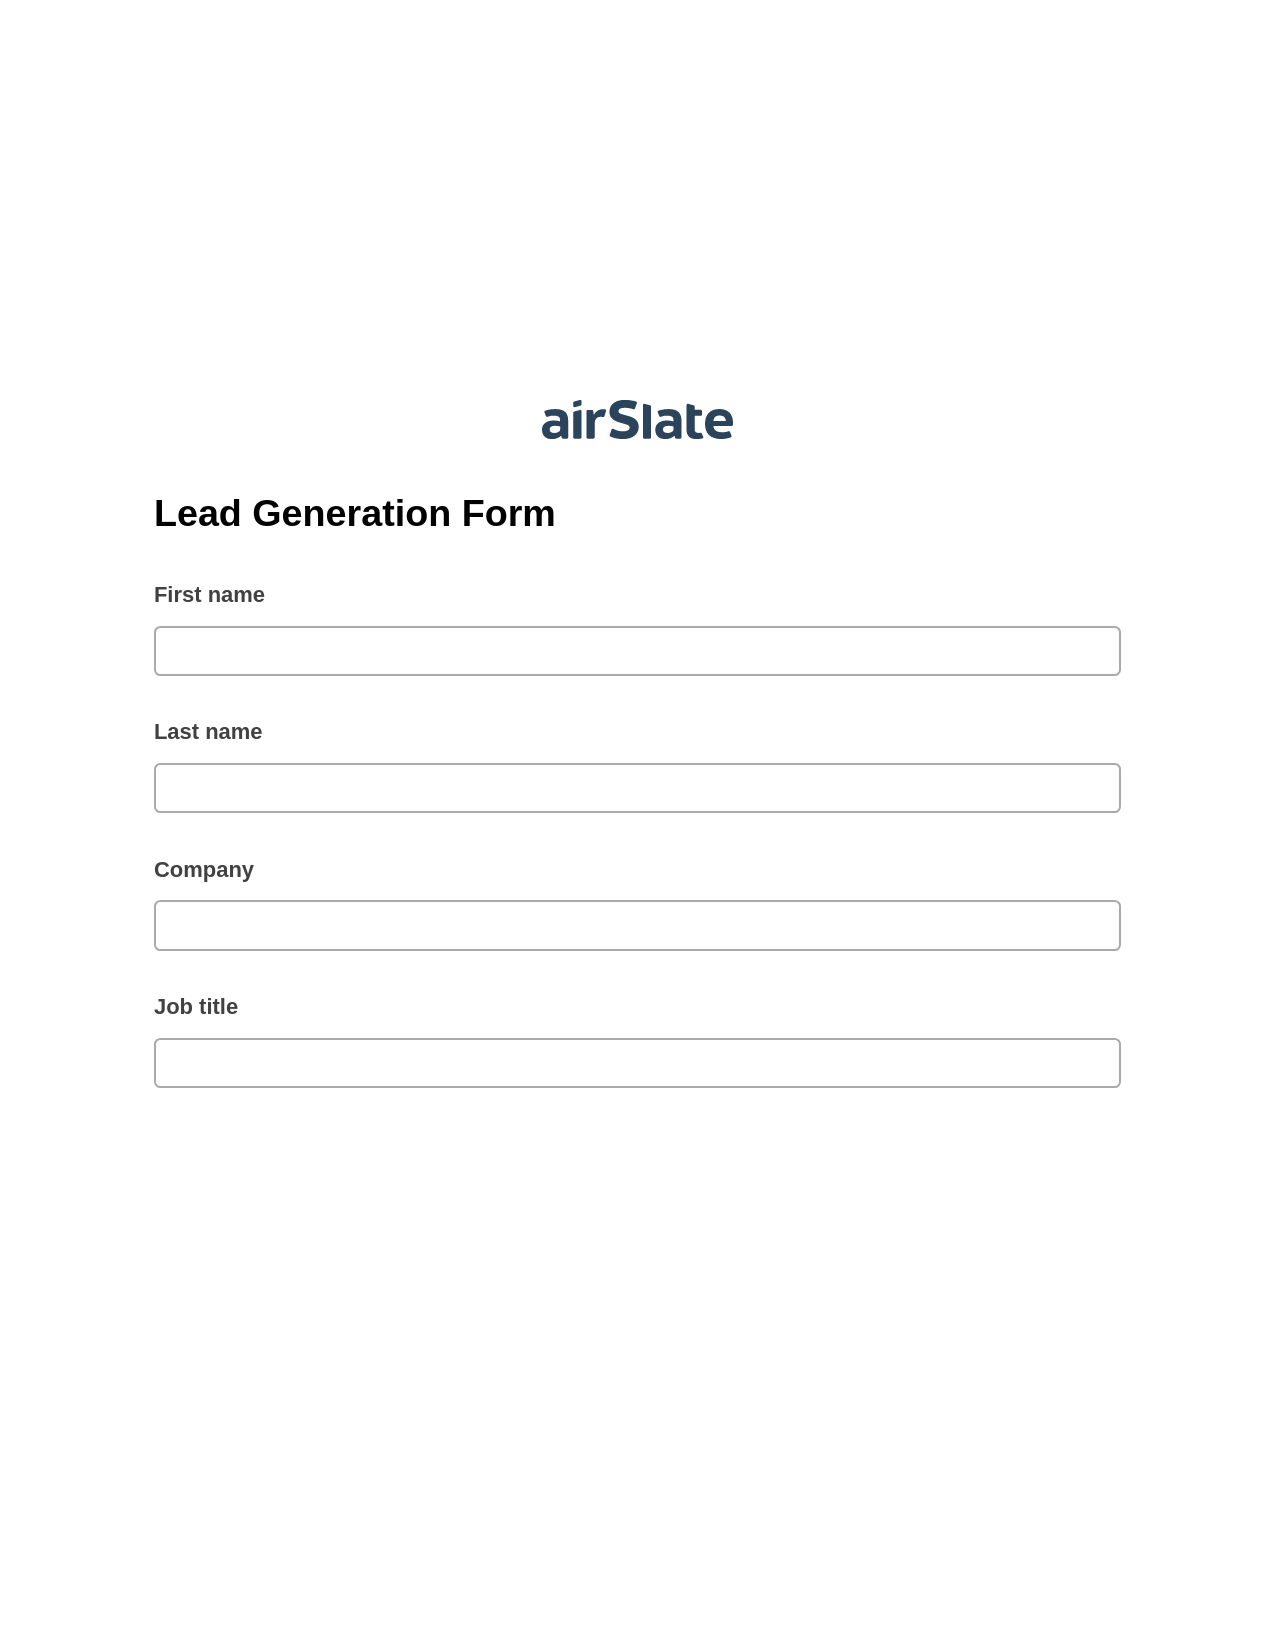 Lead Generation Form Pre-fill from another Slate Bot, Roles Reminder Bot, Export to Salesforce Record Bot